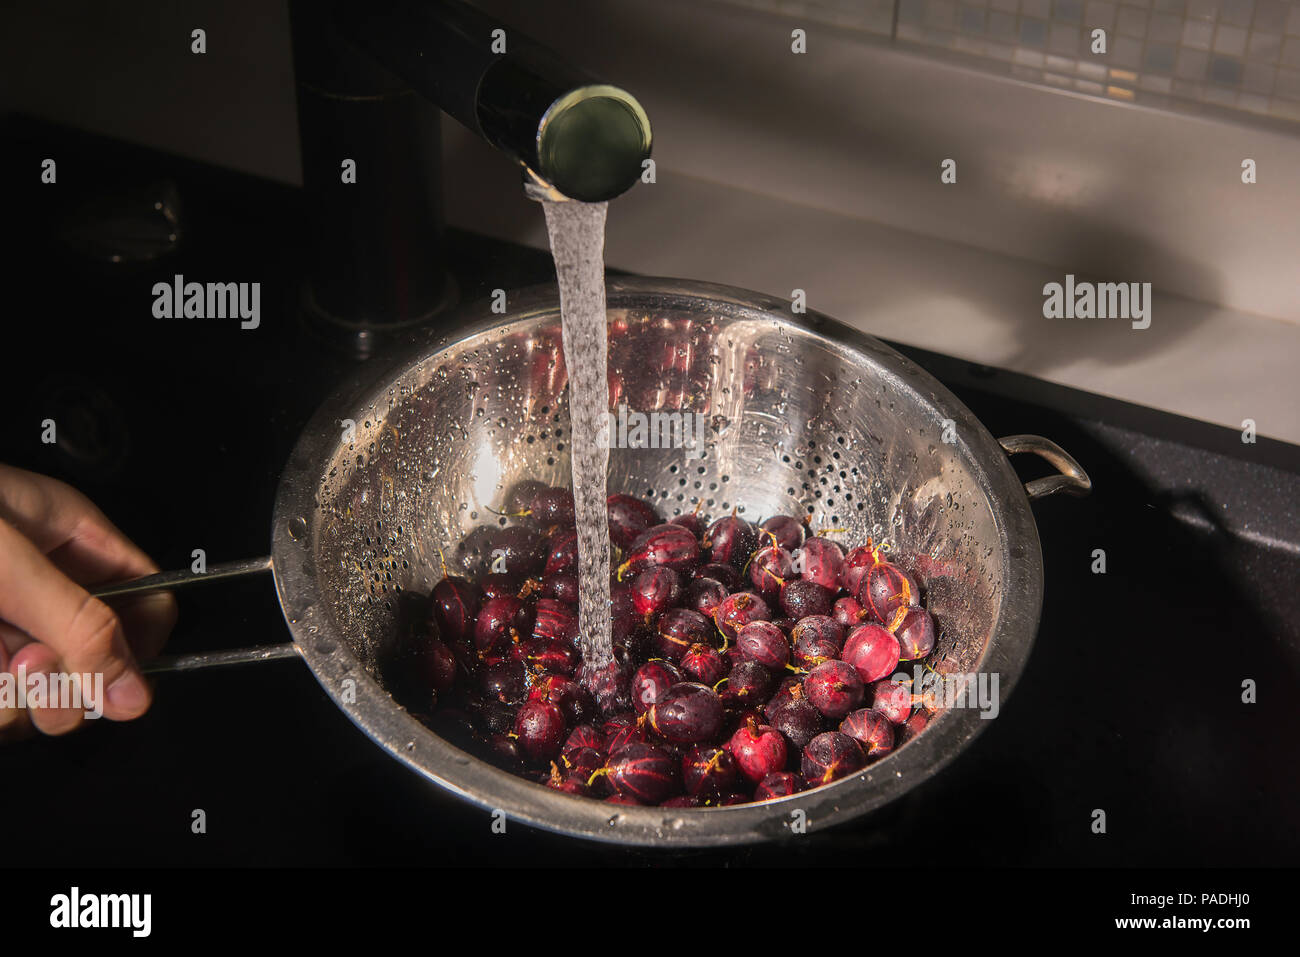 Ripe fresh red gooseberries washed in water running from faucet into shiny metal colander and in black kitchen sink. Boy's hand is holding the colland Stock Photo